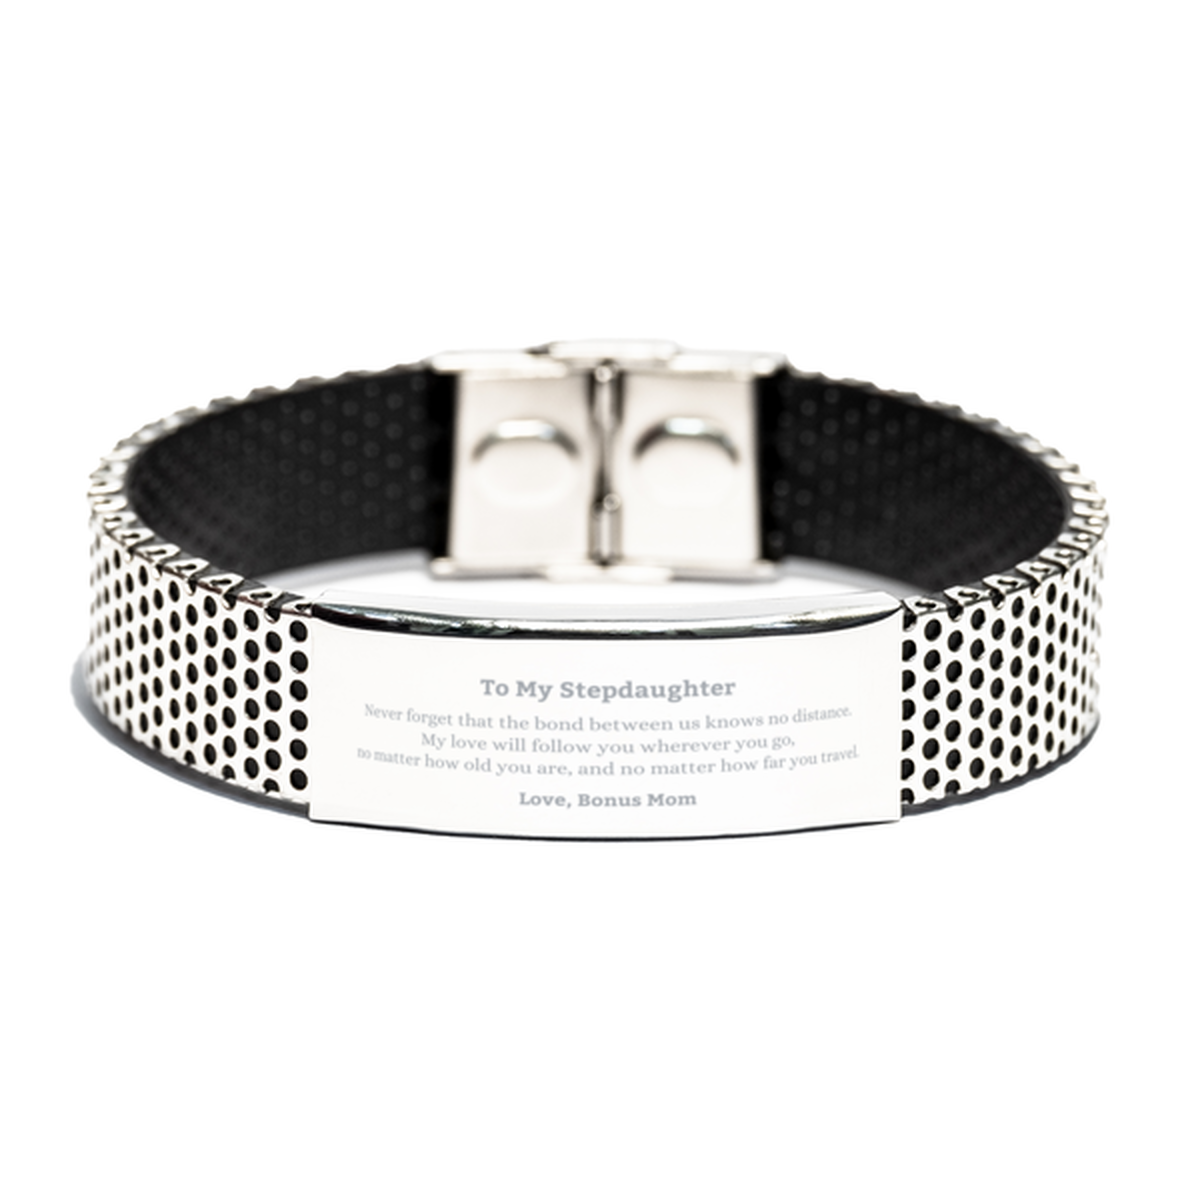 Stepdaughter Birthday Gifts from Bonus Mom, Adjustable Stainless Steel Bracelet for Stepdaughter Christmas Graduation Unique Gifts Stepdaughter Never forget that the bond between us knows no distance. Love, Bonus Mom